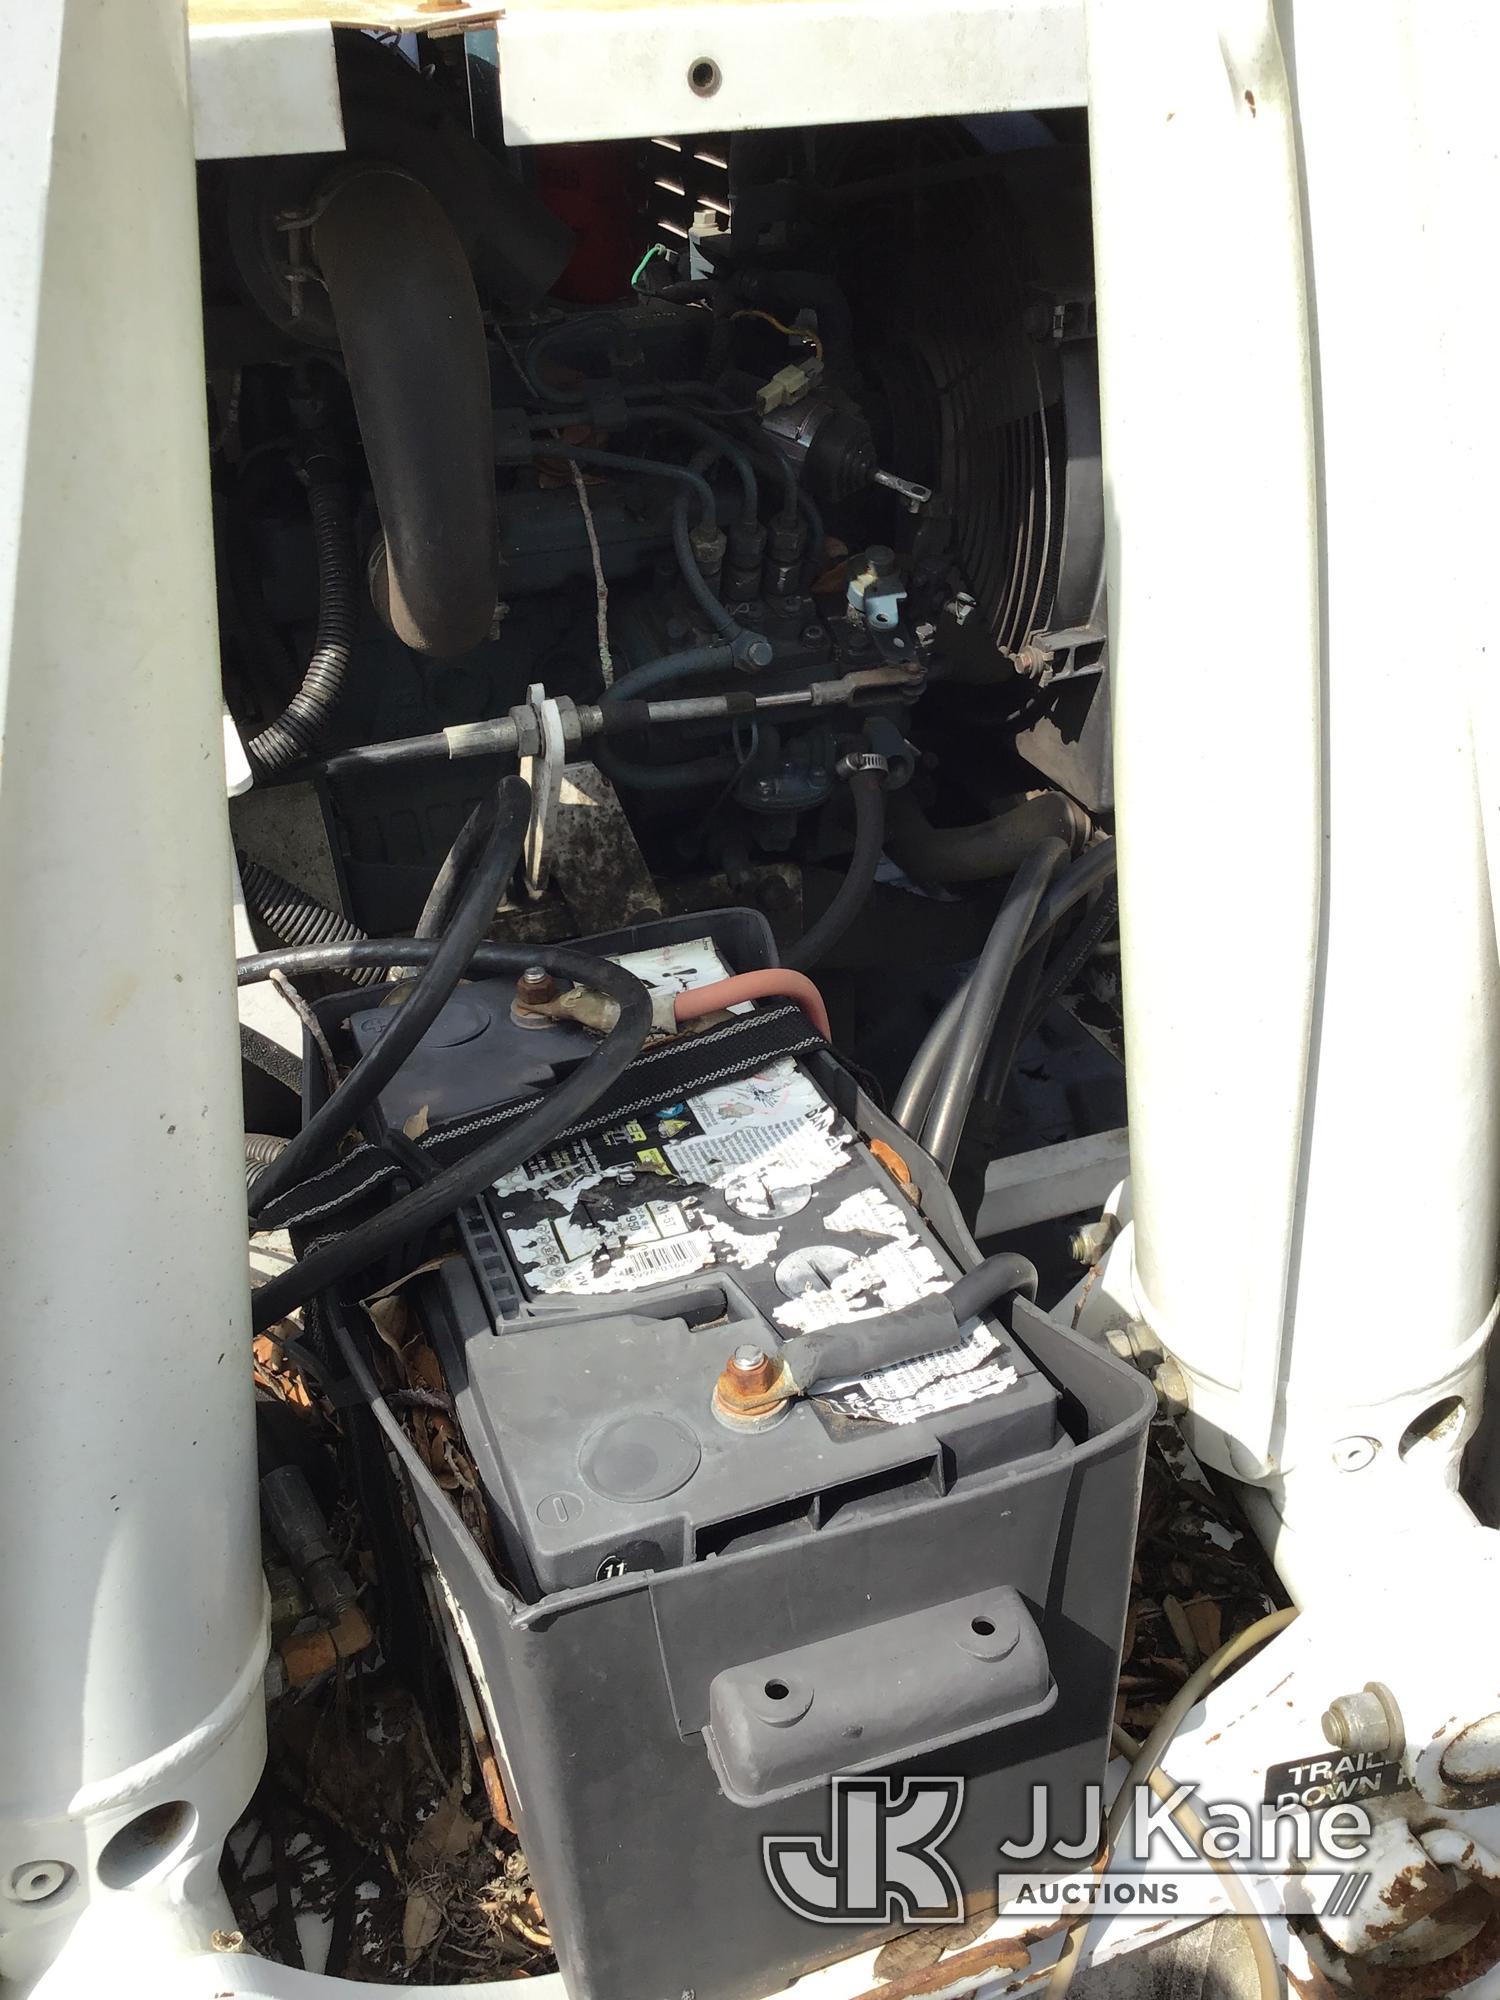 (Ocala, FL) ALTEC AT37GW Does Not stay Running, No Key, Bucket has Damage) (Seller States: Electrica